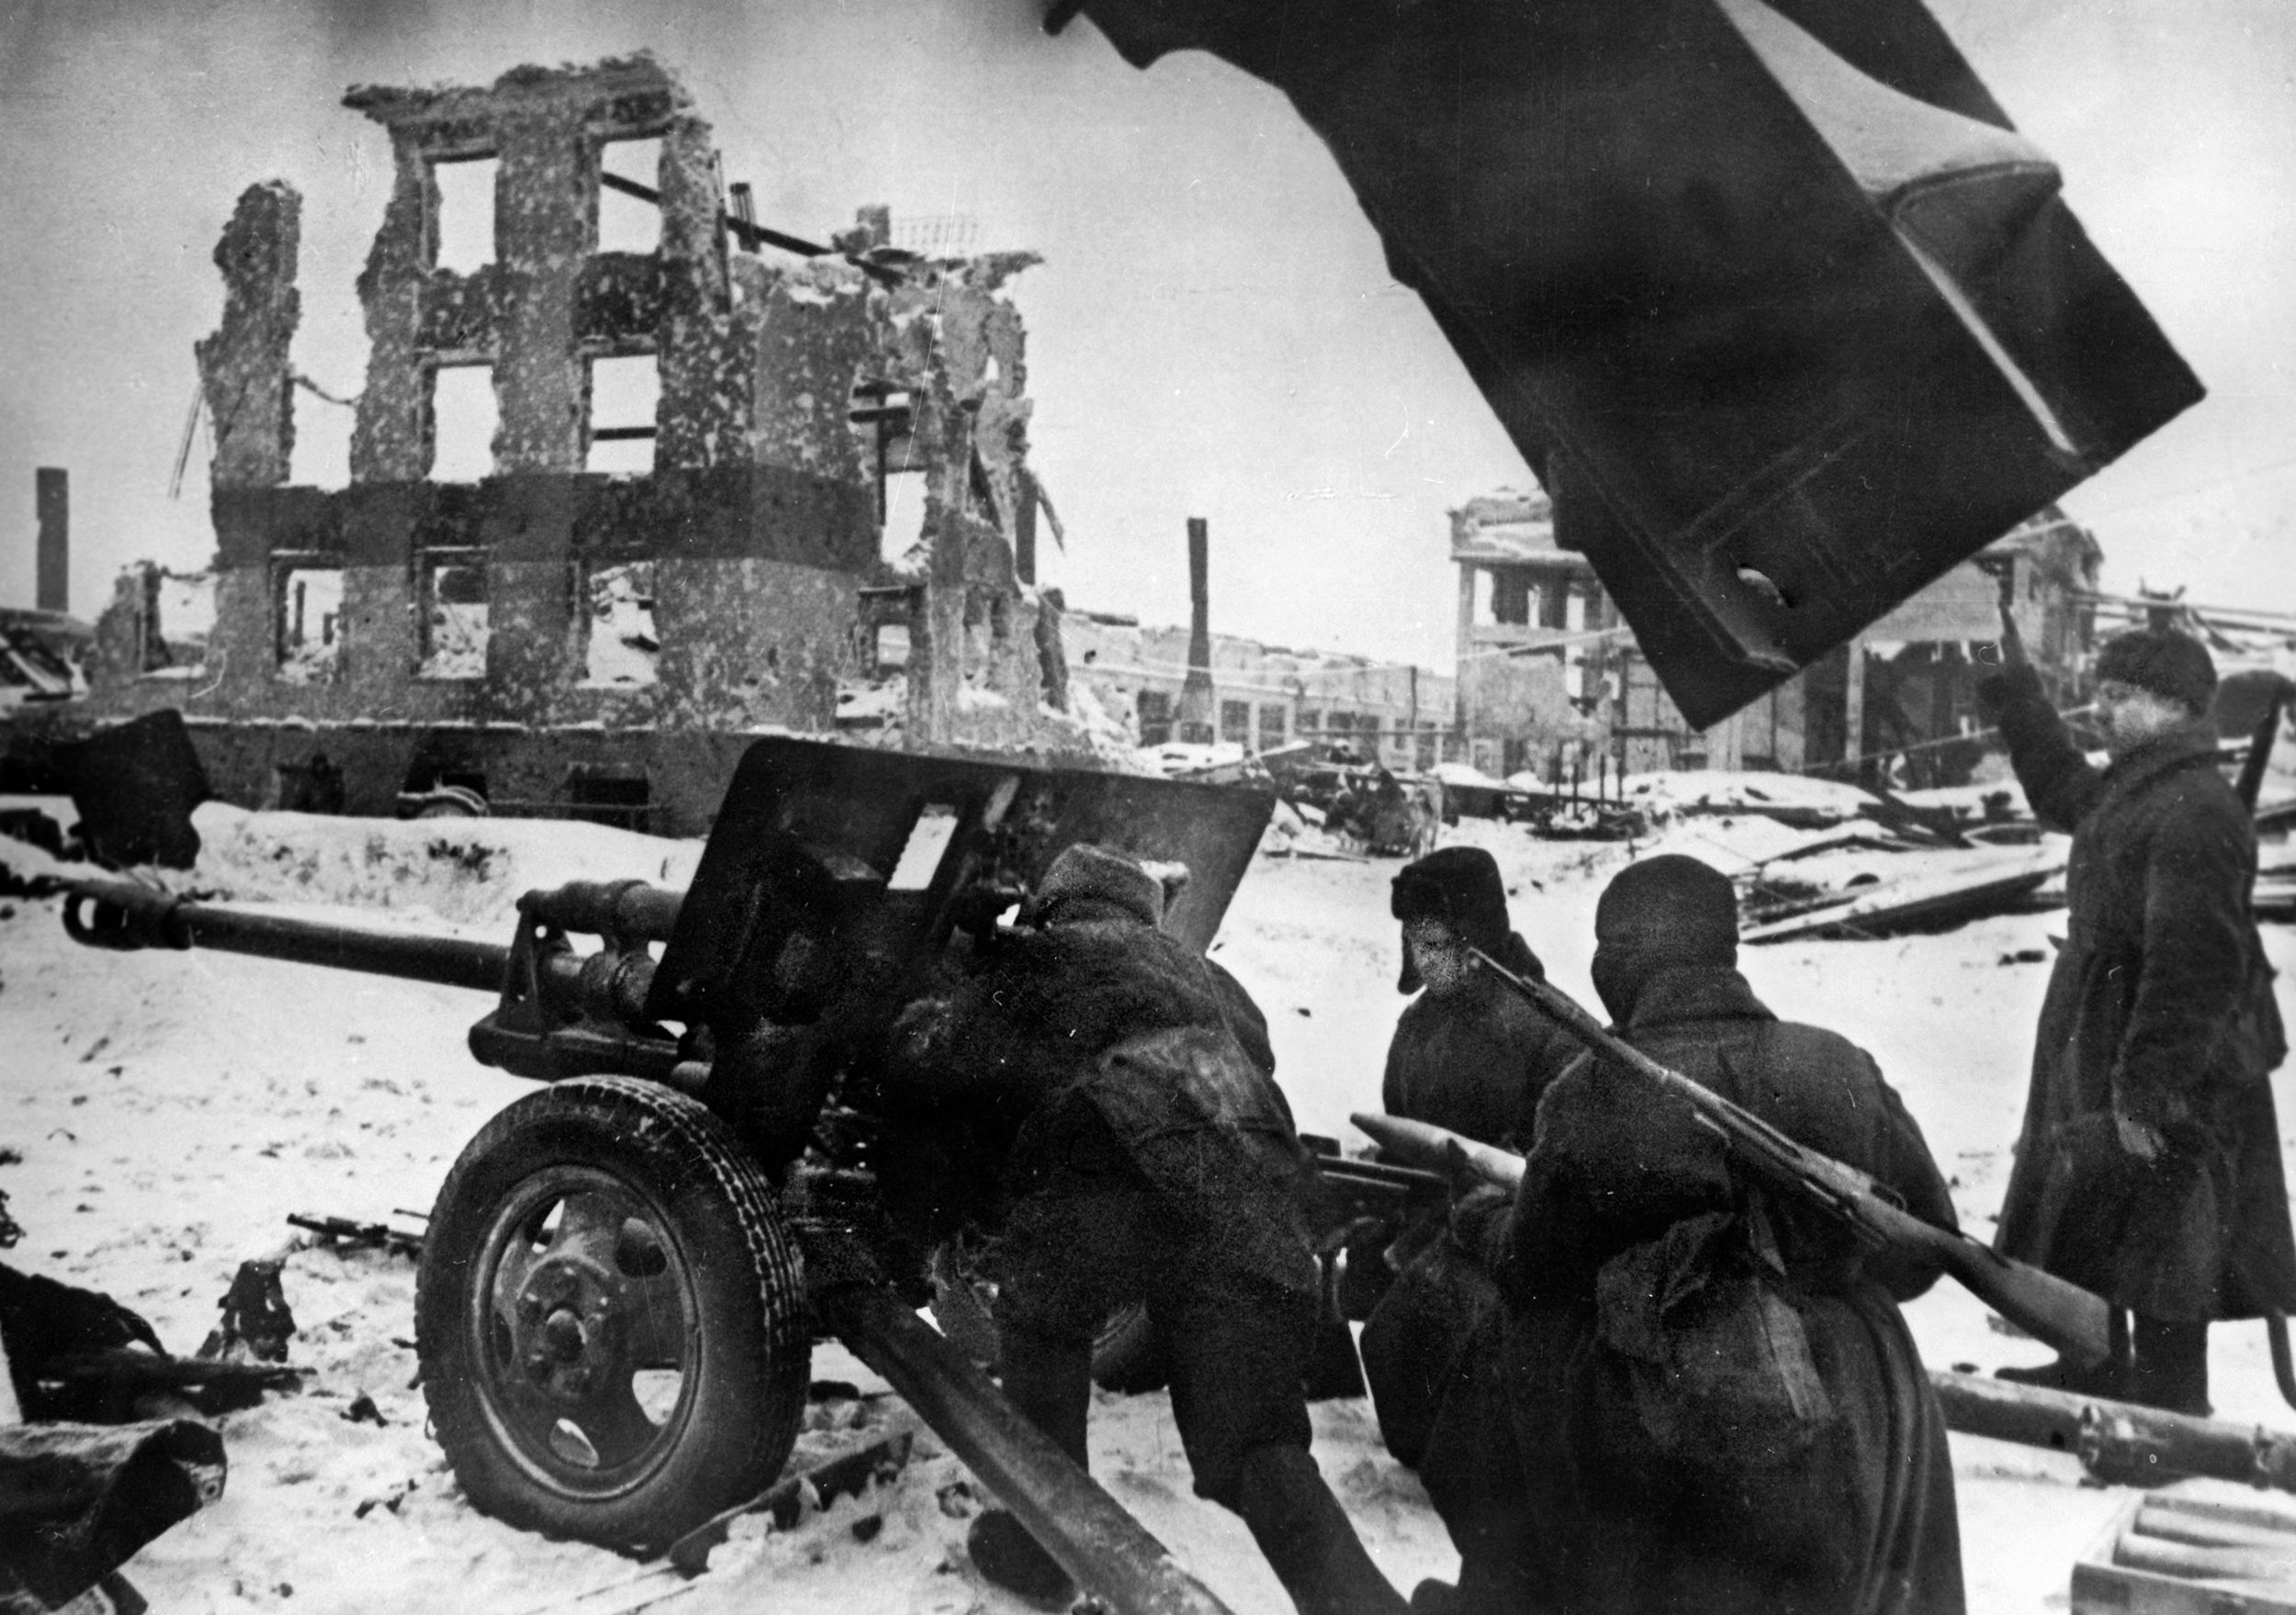 A Soviet gun crew poses in a photograph that was likely staged for propaganda purposes. During a lengthy siege, the Soviet Red Army compelled the German Sixth Army, trapped in the city of Stalingrad, to surrender.